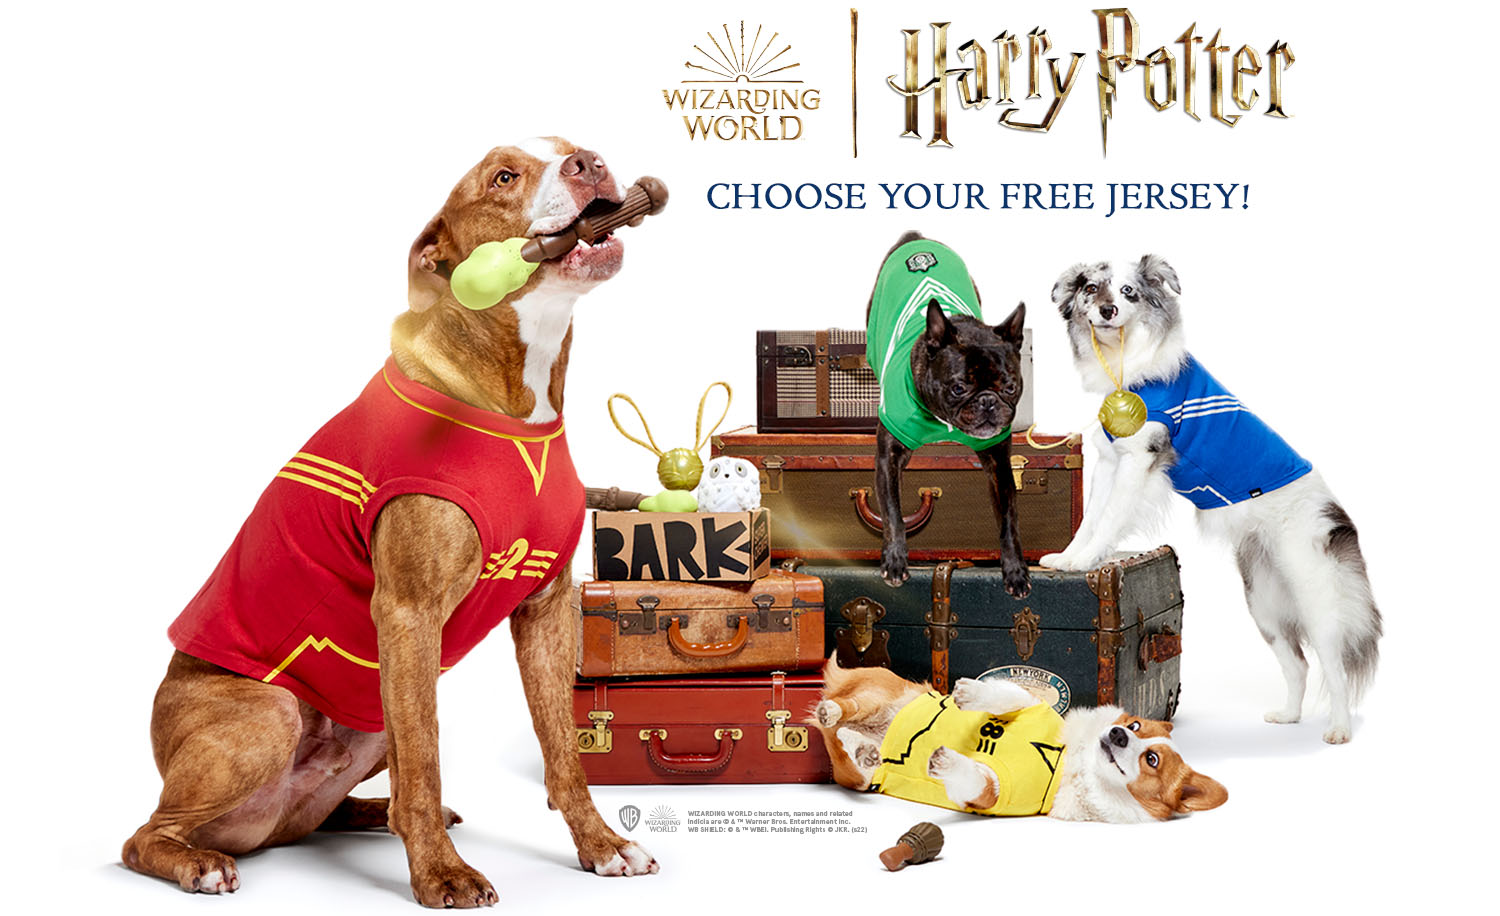 WIZARDING WORLD | Harry Potter - CHOOSE YOUR FREE JERSEY!